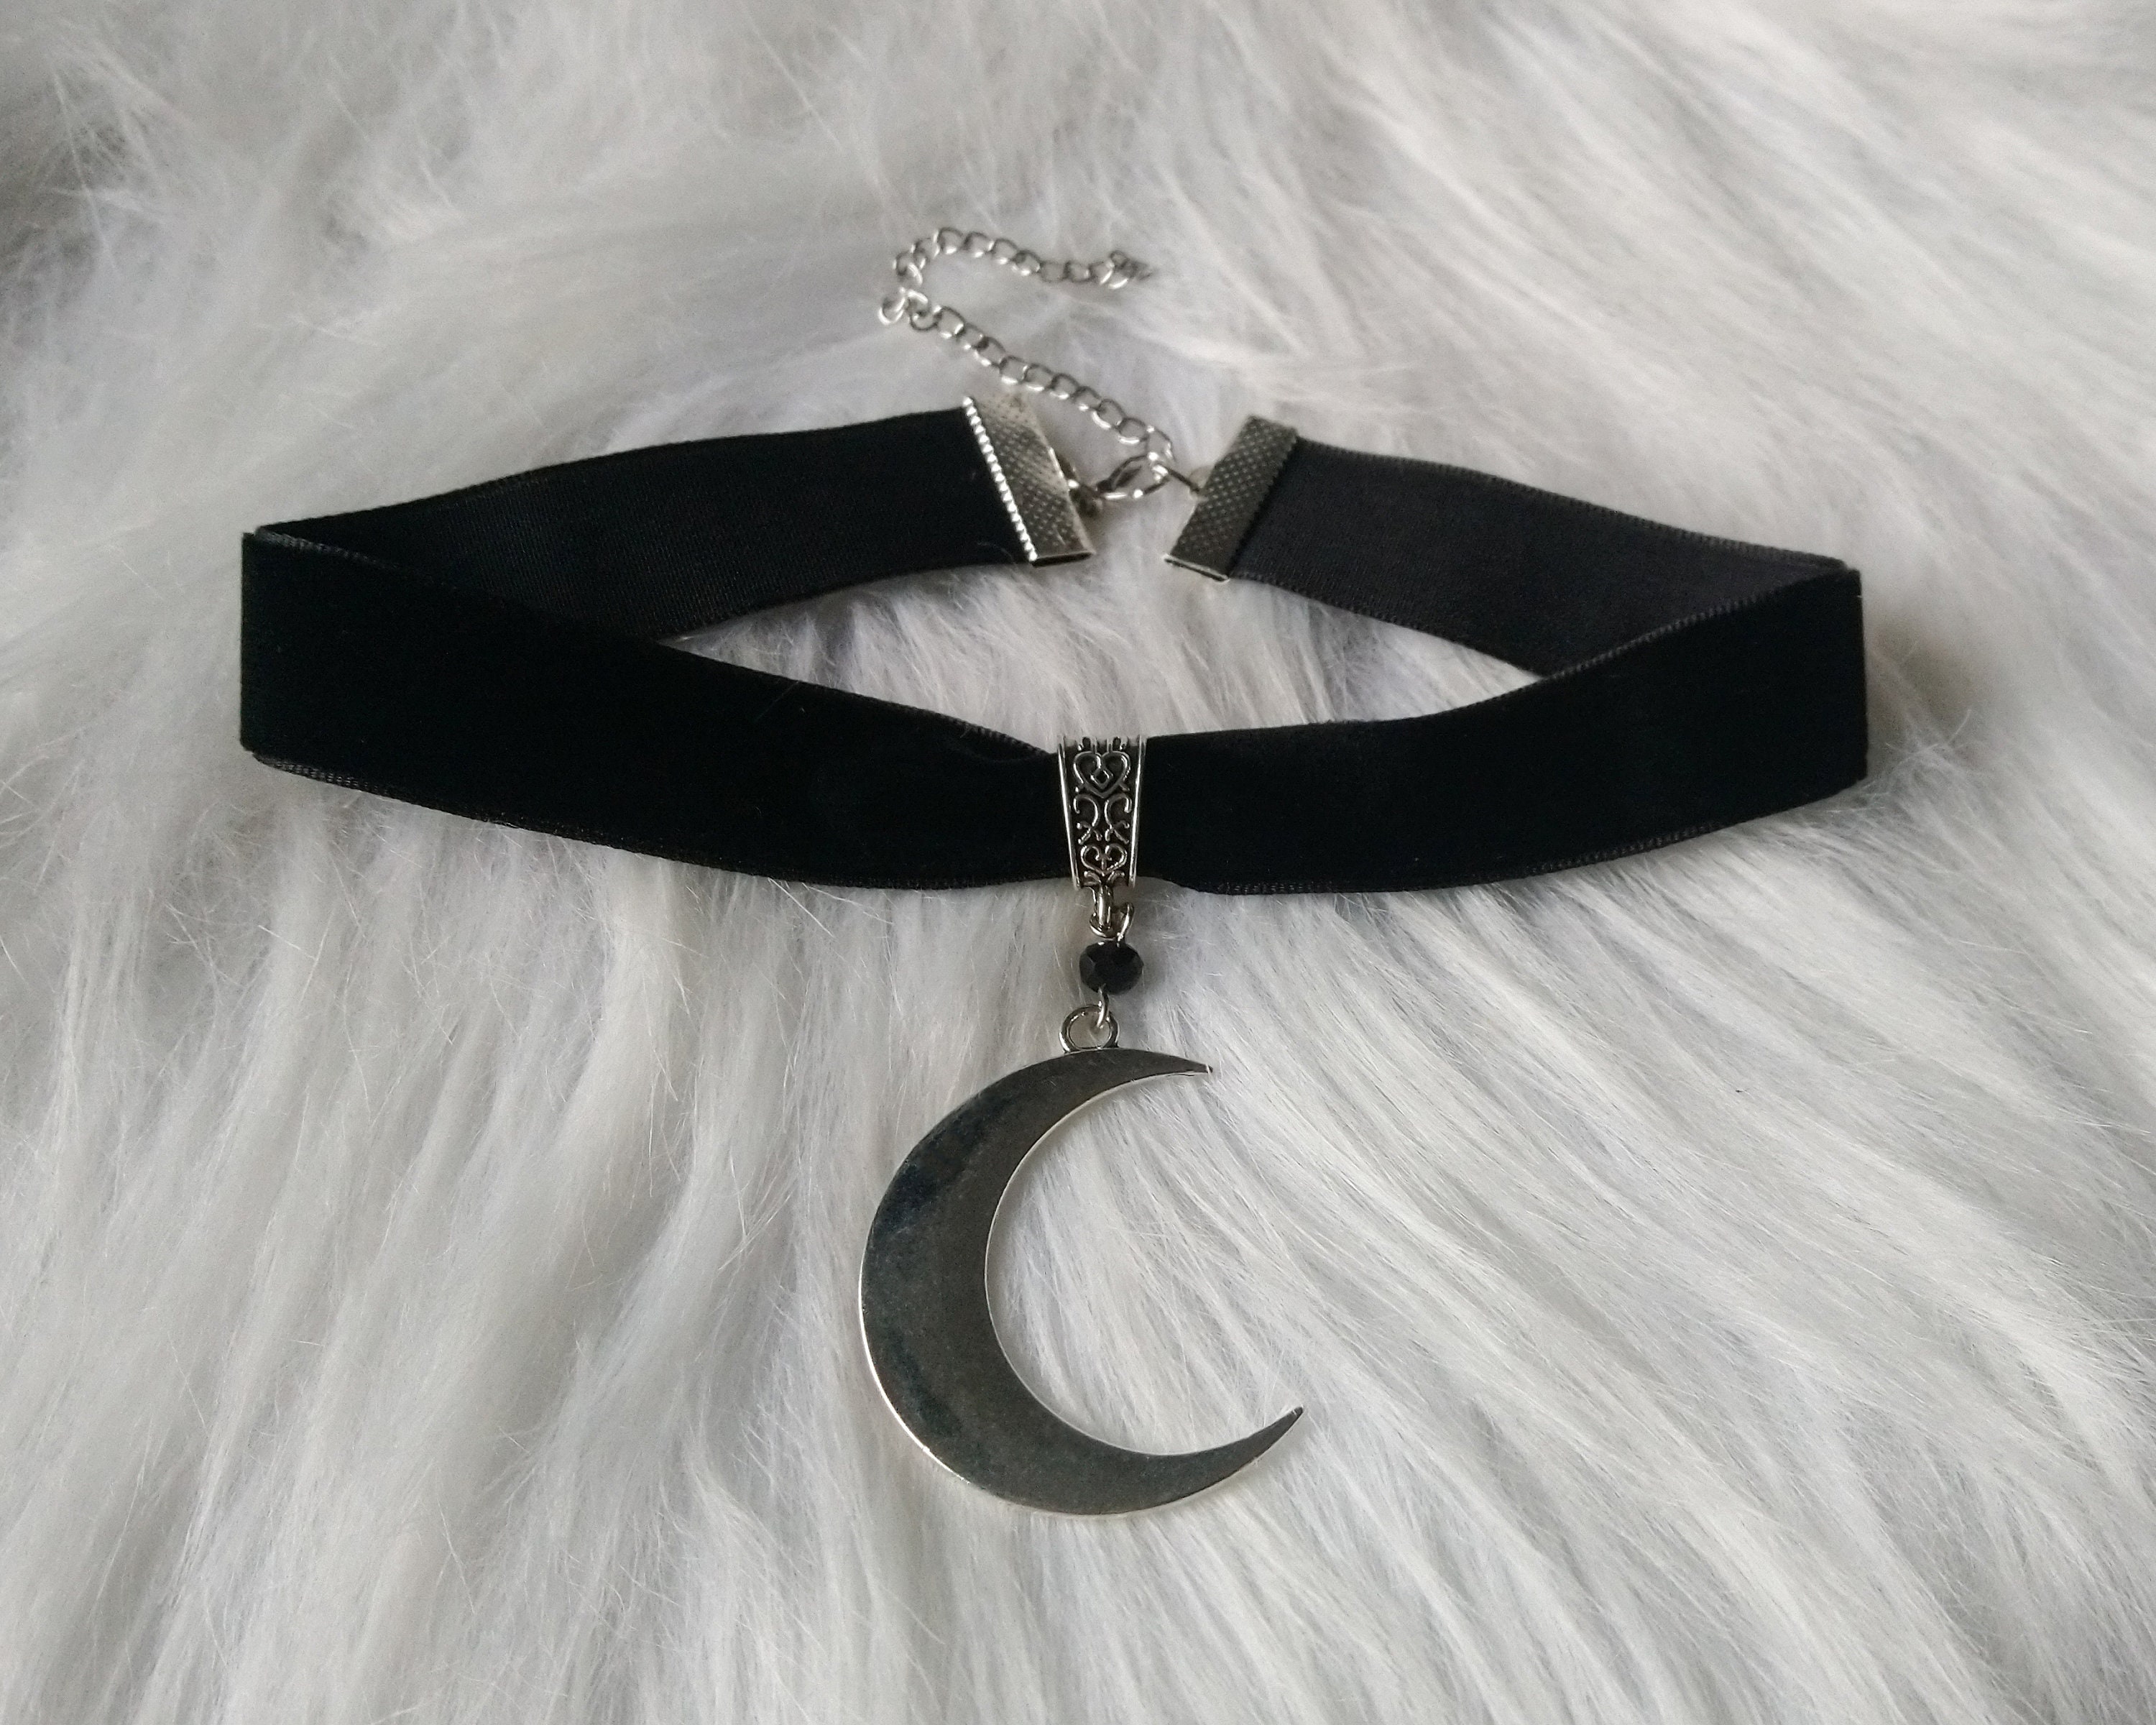  JczR.Y Black Choker Necklaces for Woman Black Moon Choker  Necklace Leather Velvet Moon Necklace Retro Half Crescent Horn Necklace  Pendant Jewelry: Clothing, Shoes & Jewelry